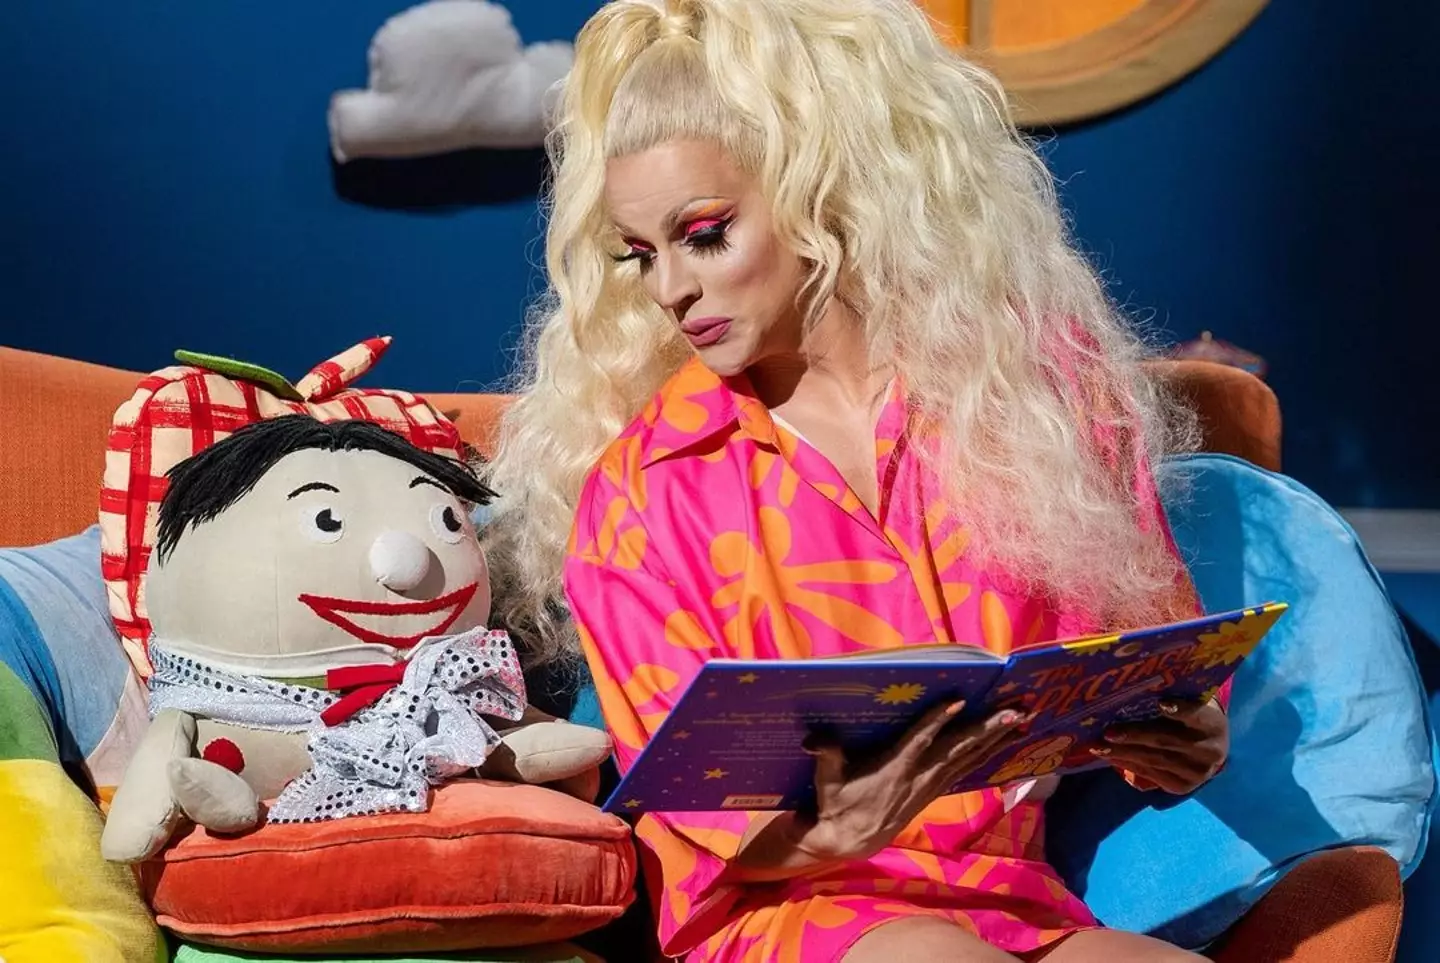 Courtney Act with Humpty.